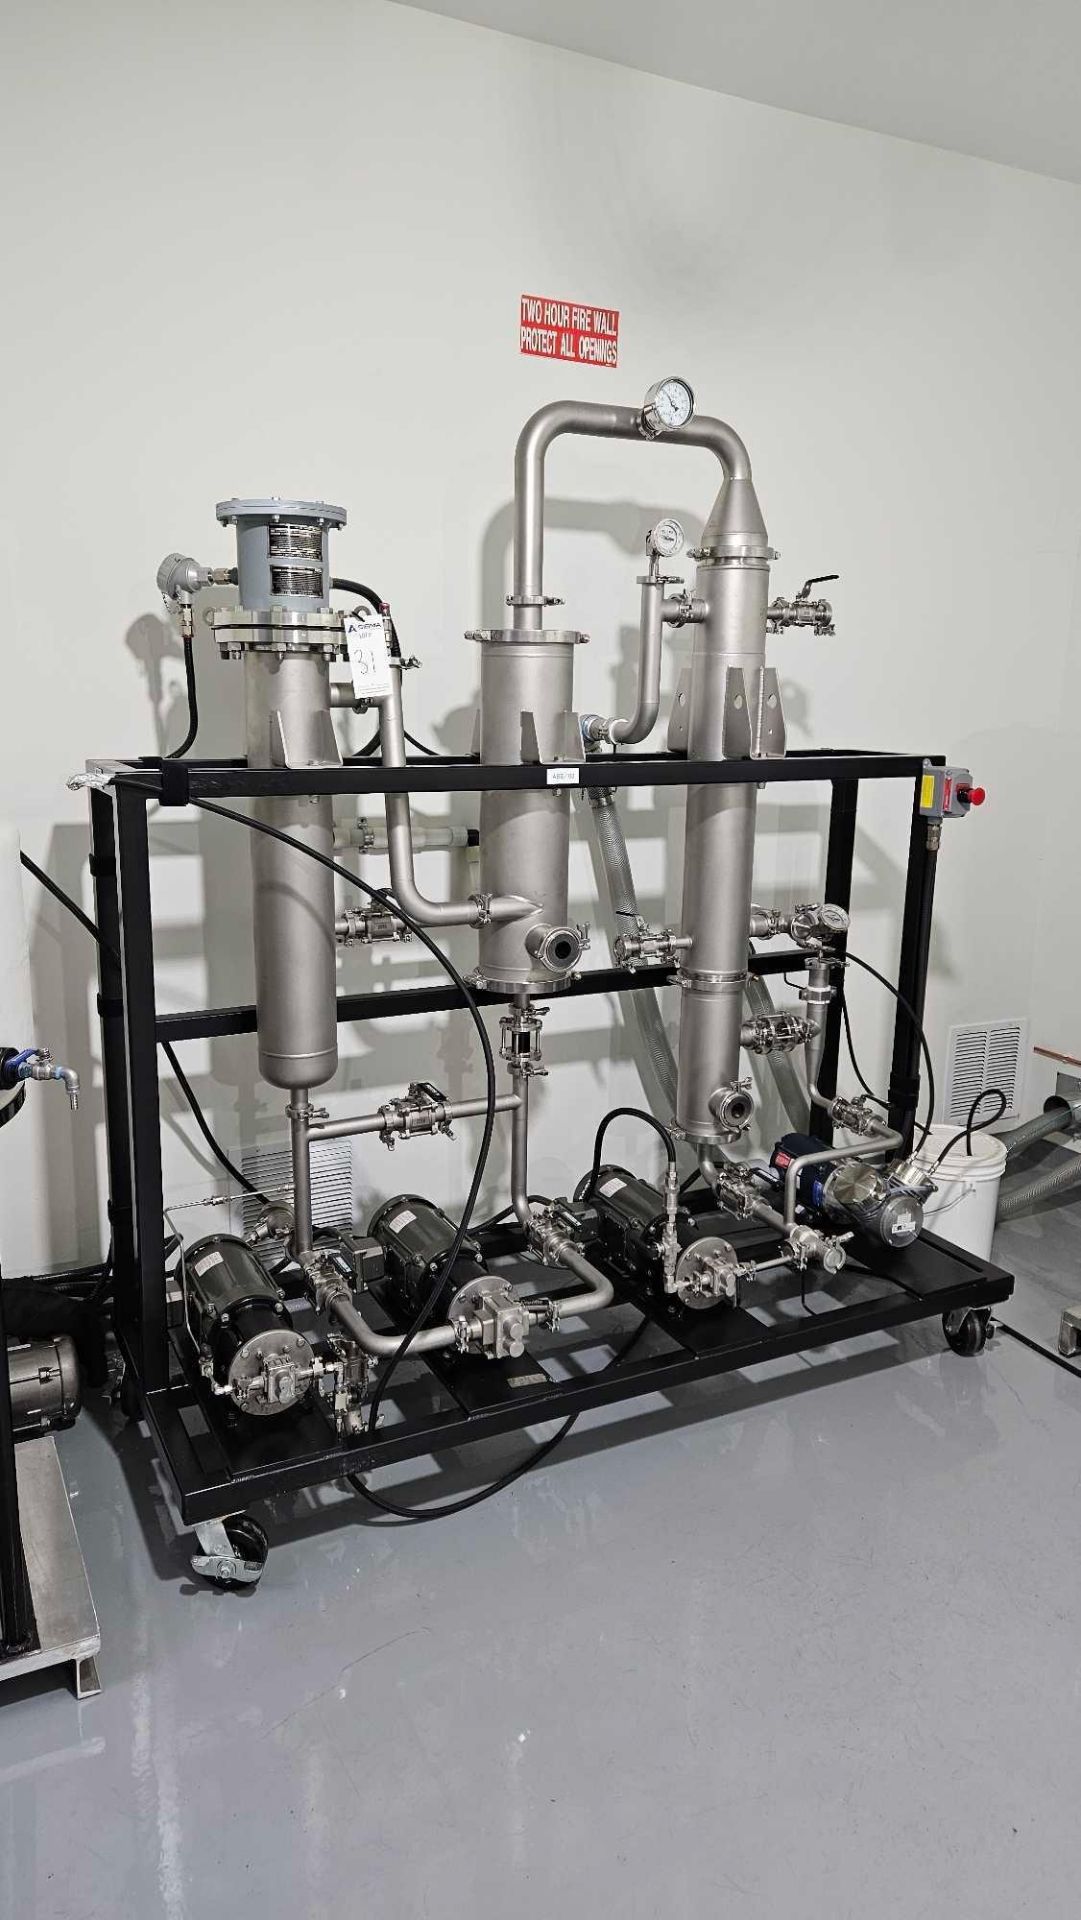 ASE-100 Precision Extraction Alcohol Recovery System - Image 10 of 14